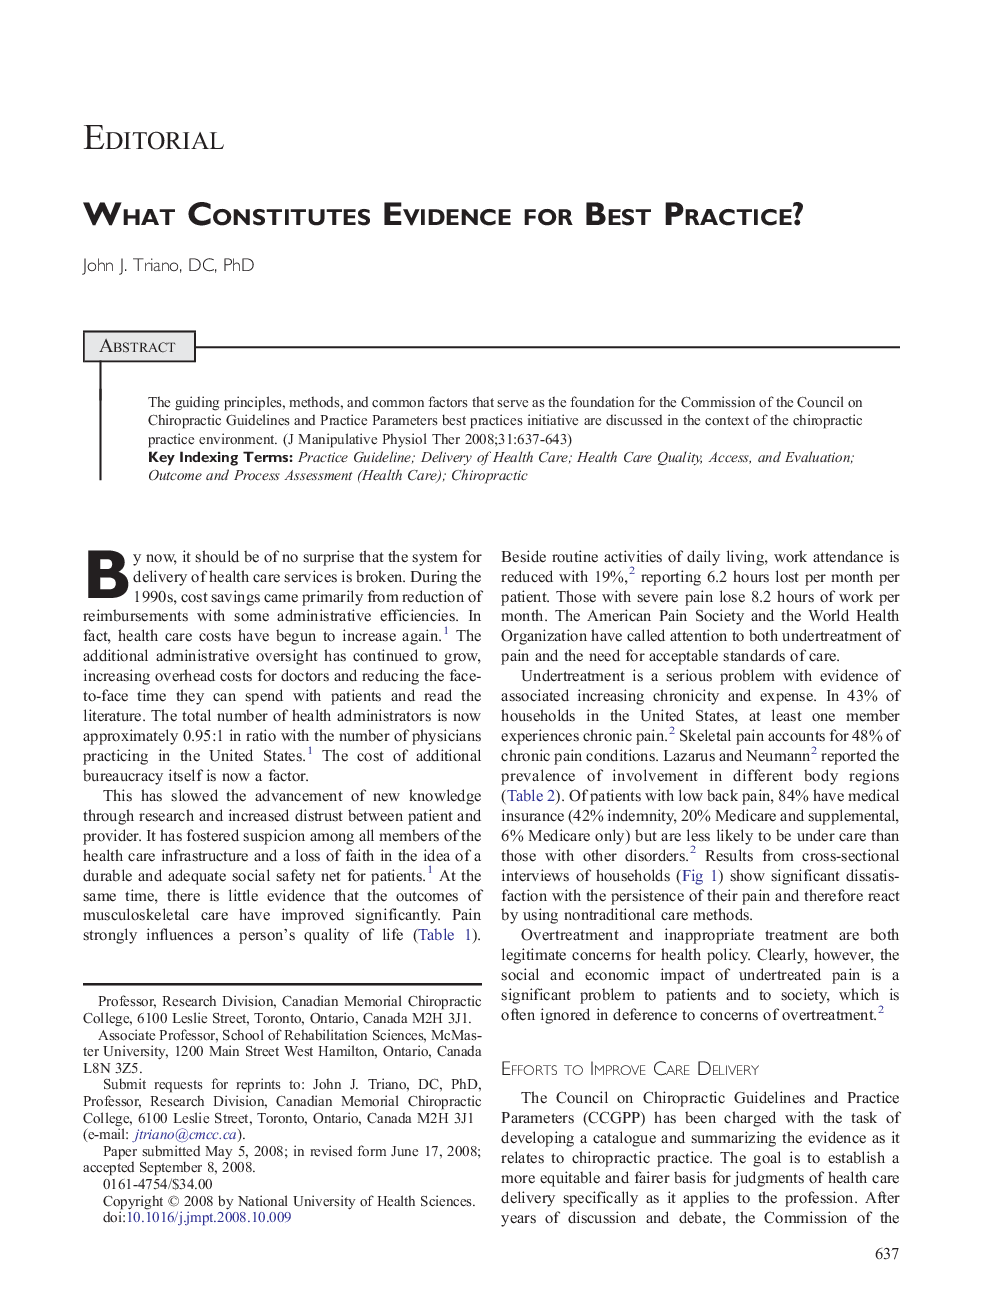 What Constitutes Evidence for Best Practice?